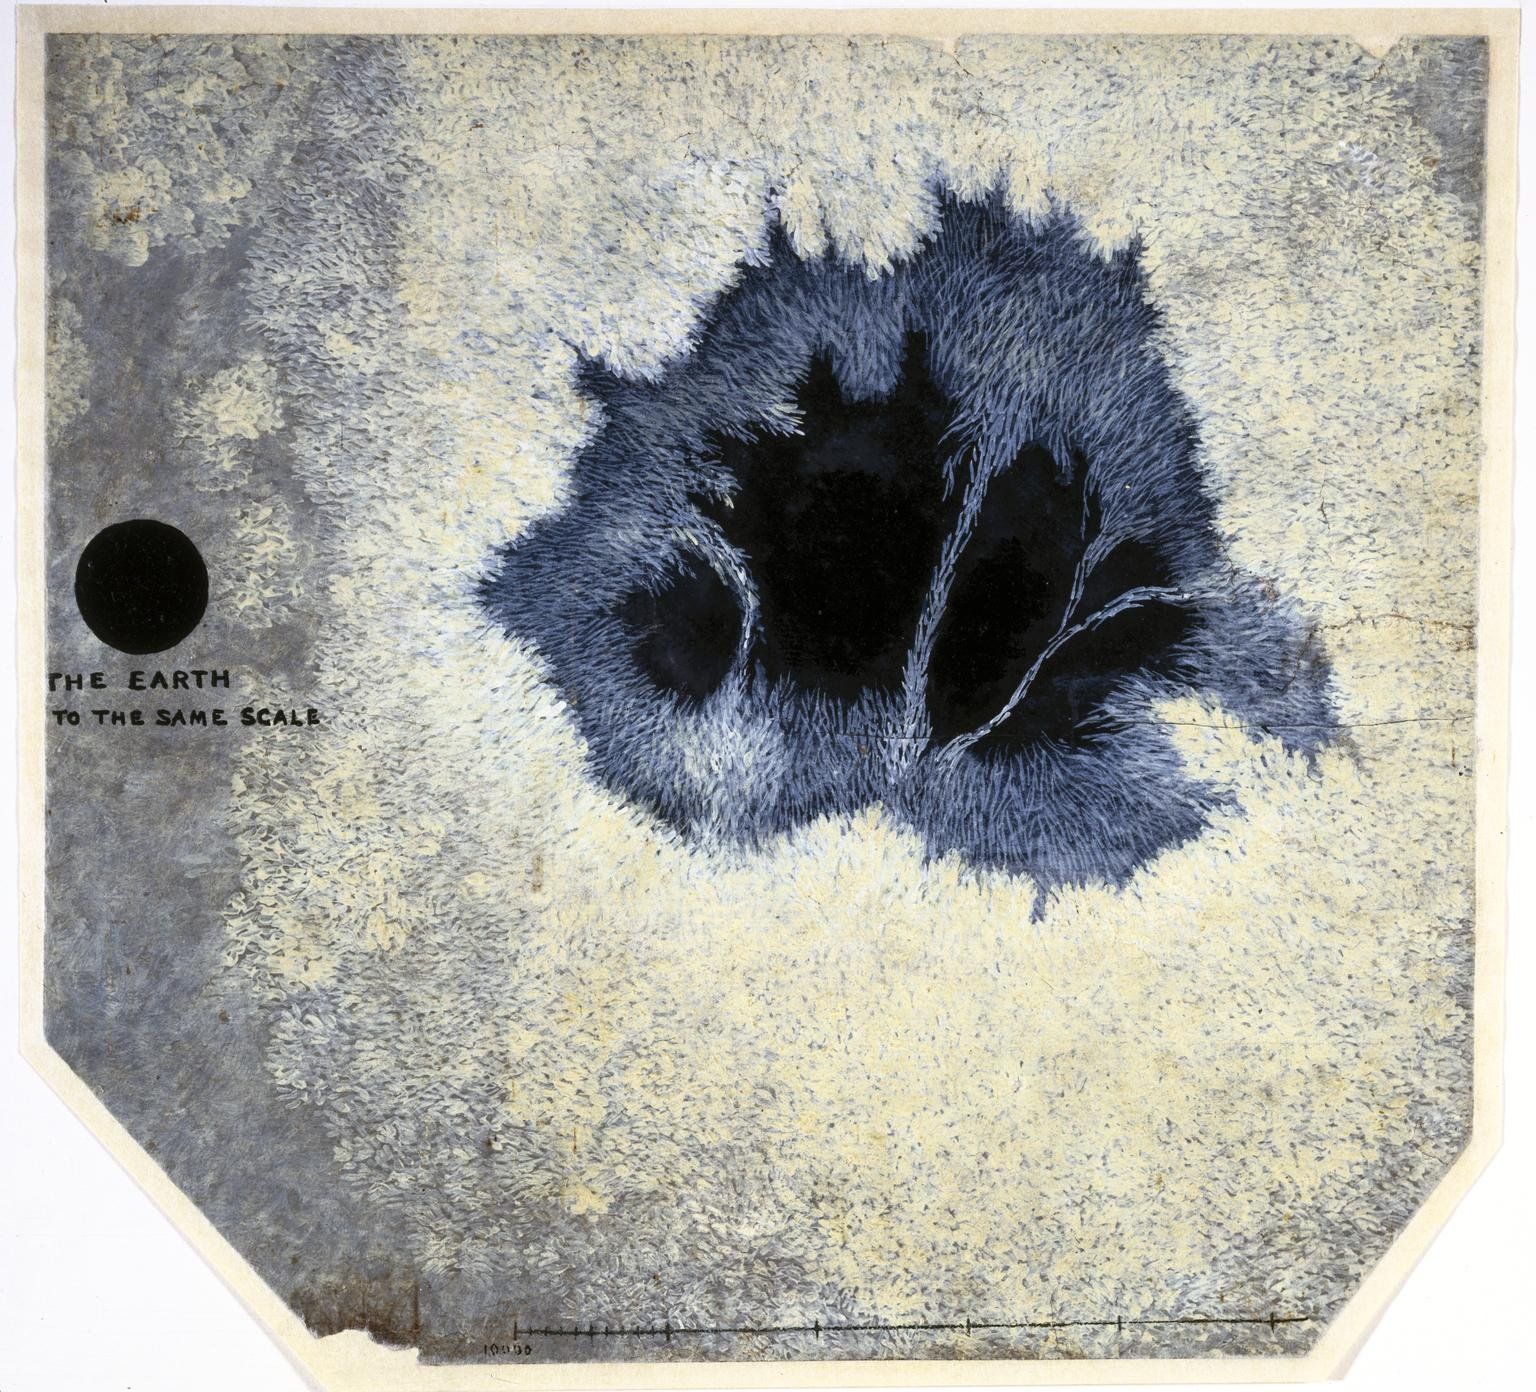 Sunspot painting by James Nasmyth, 1860, c. Science Museum Group Collection